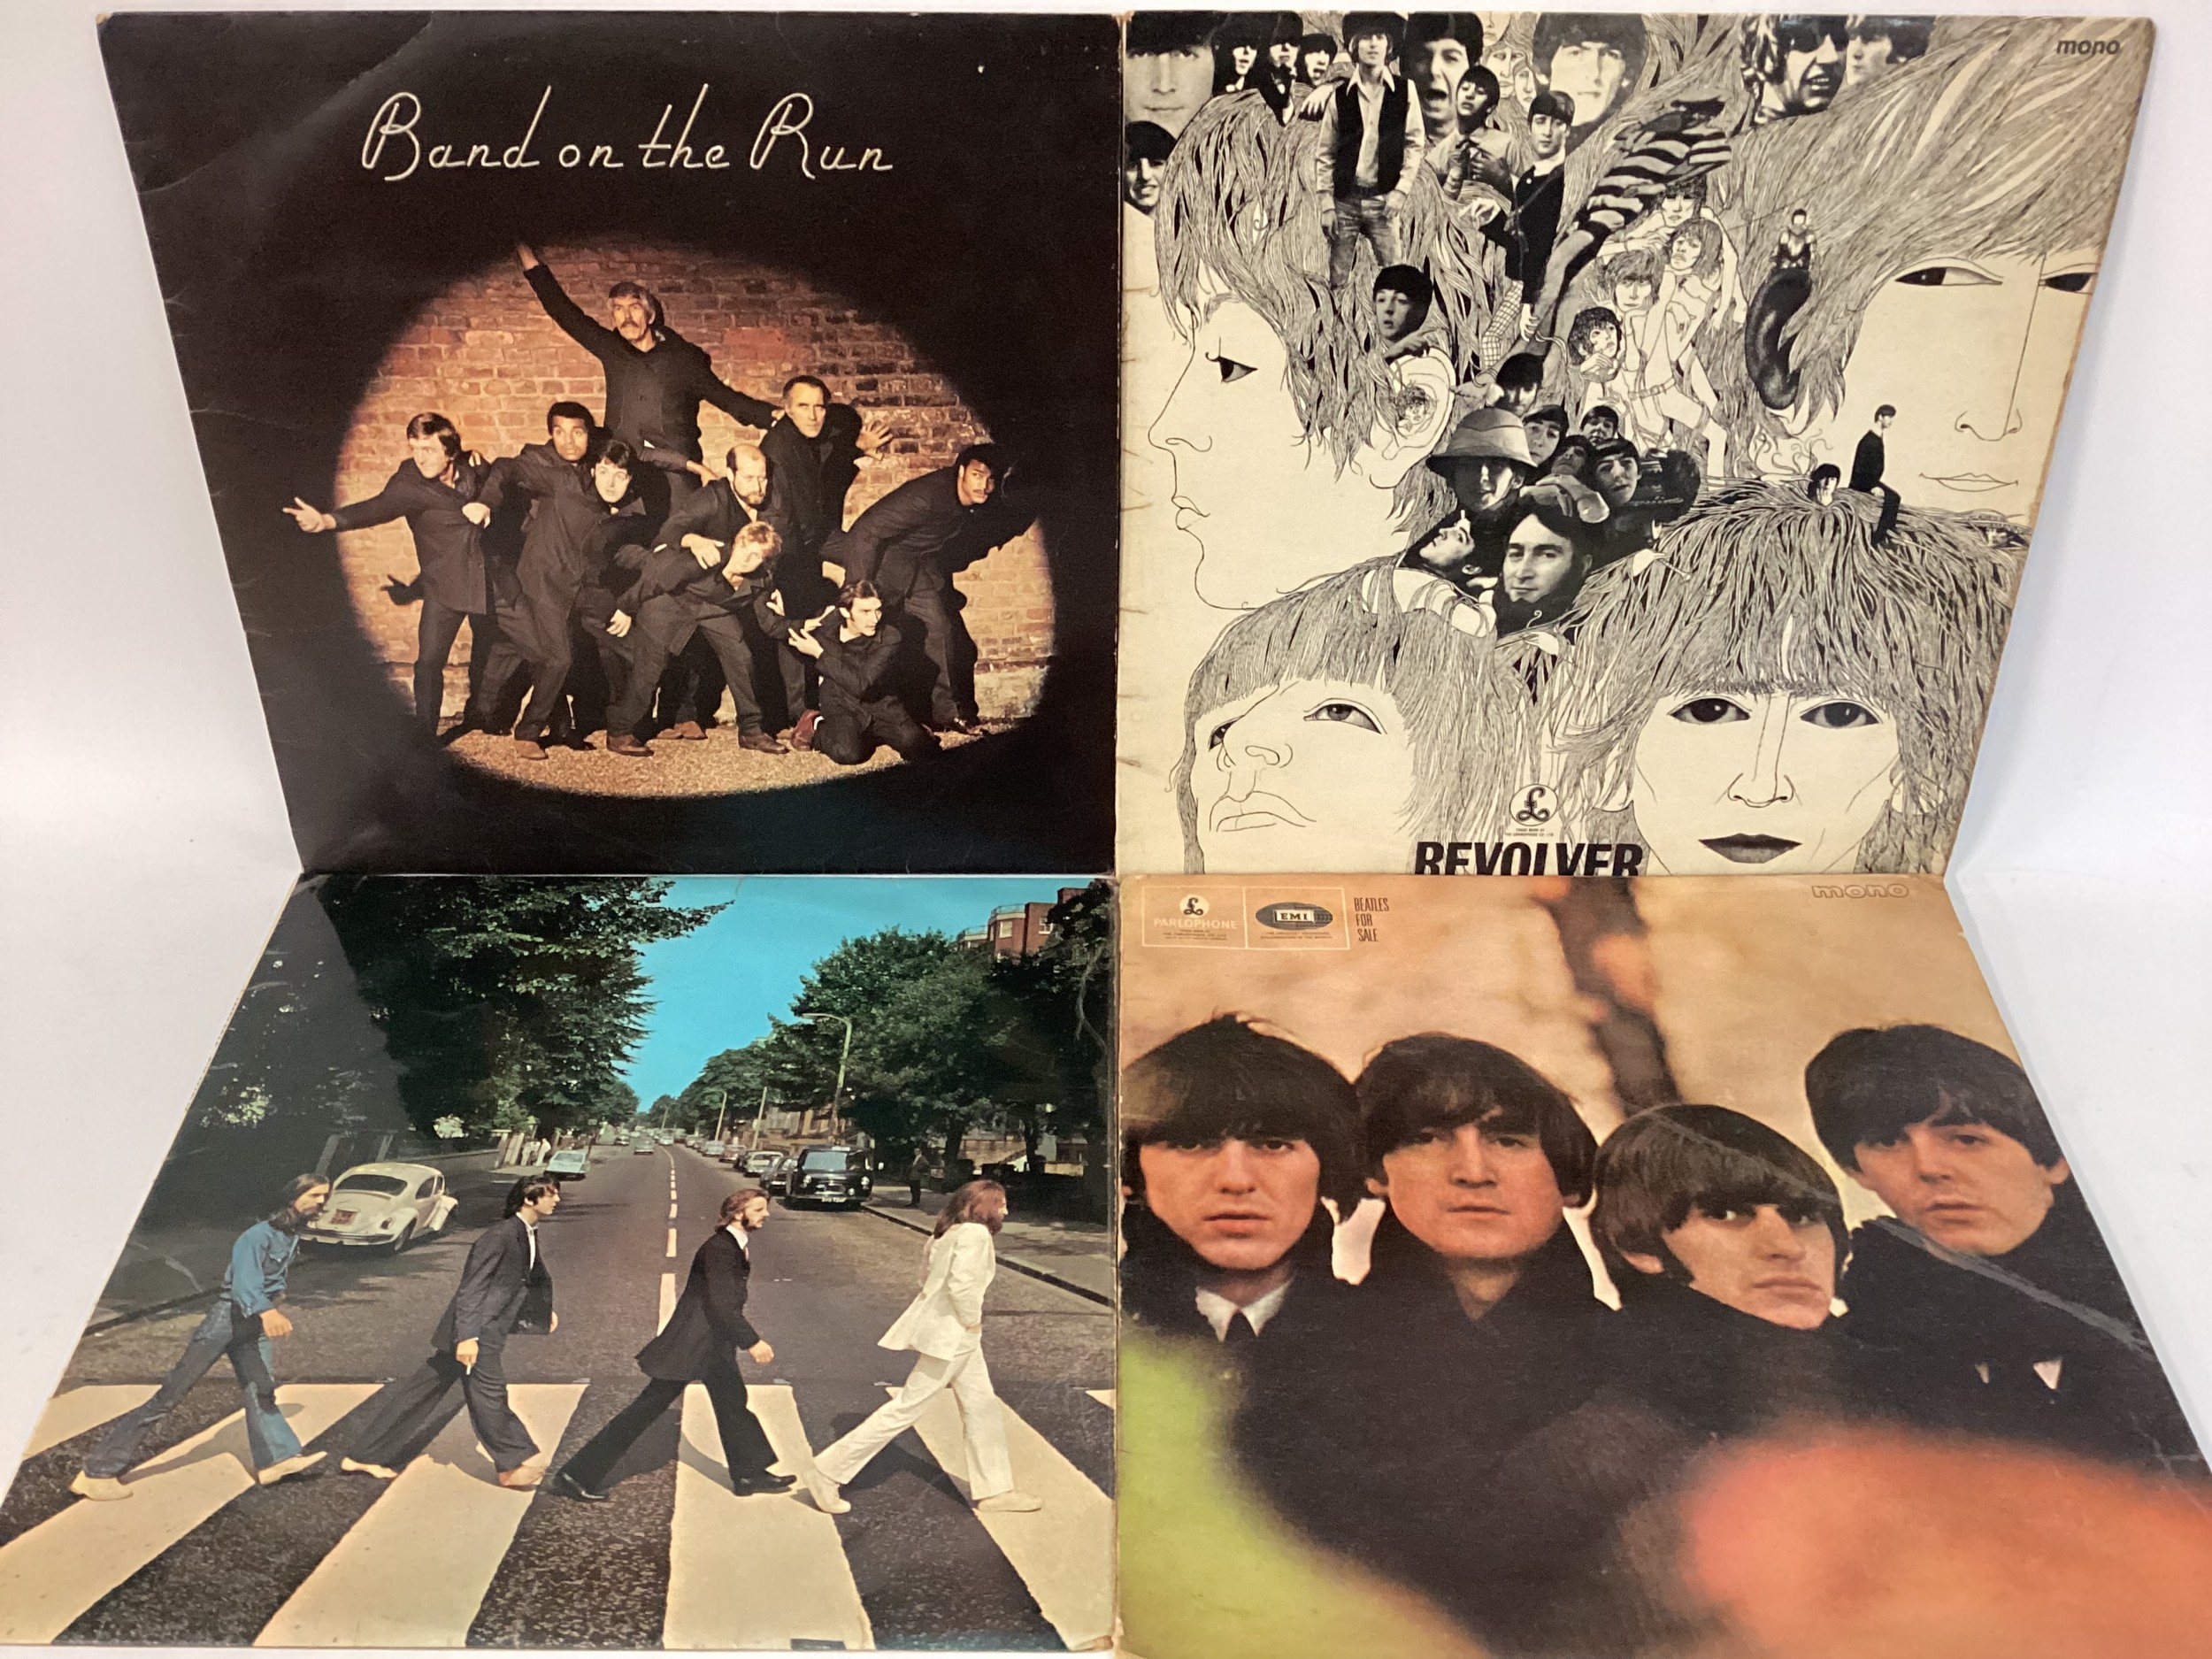 THE BEATLES VINYL RELATED LP RECORDS X 4. Copies here include - Abbey Road - Revolver - Beatles